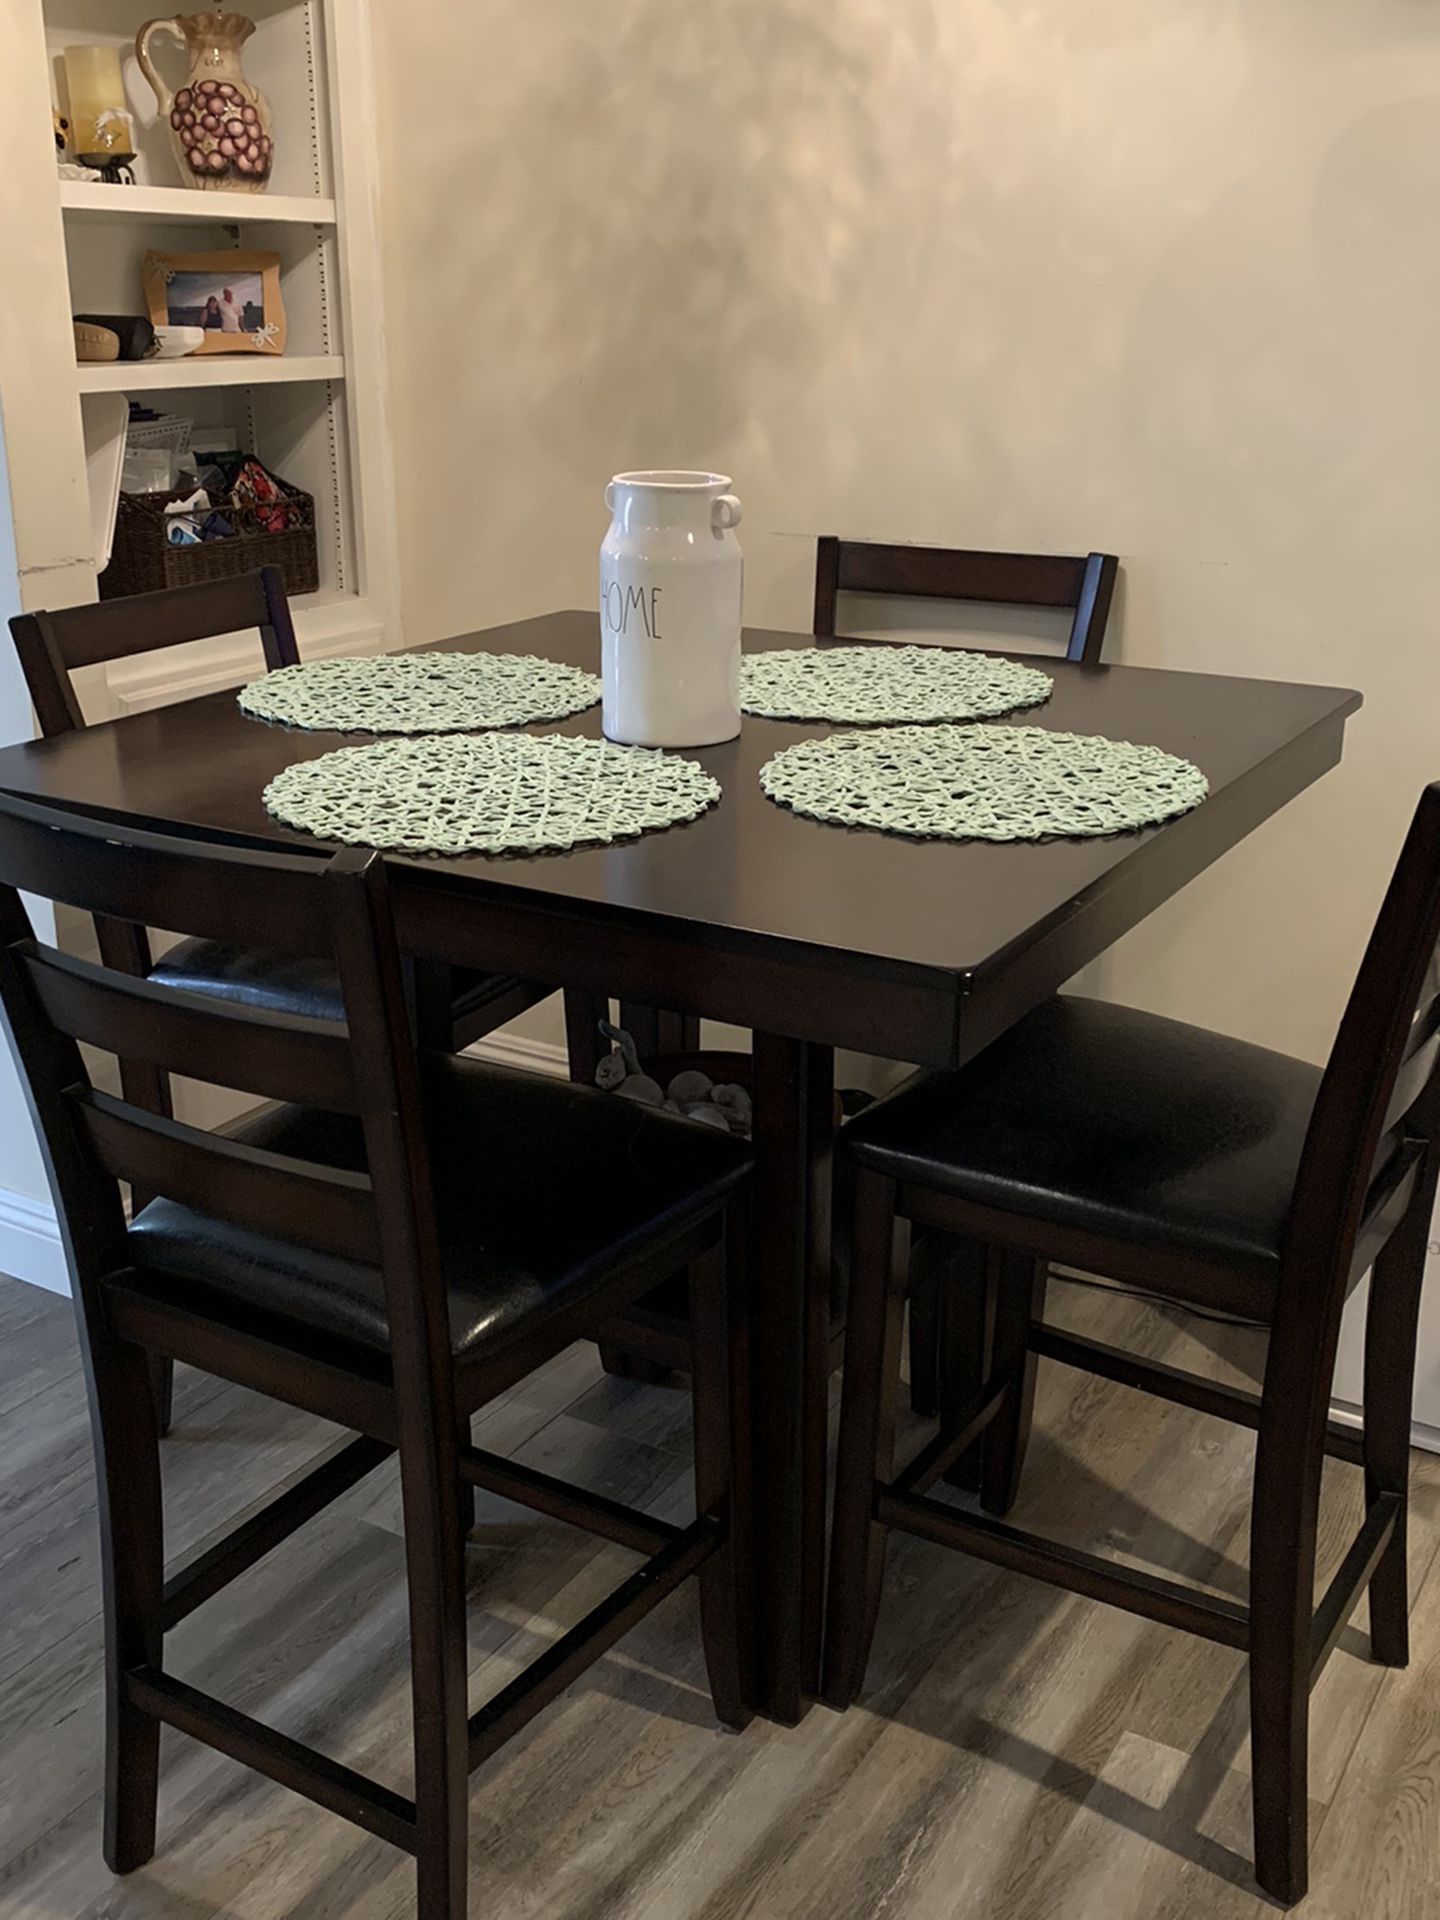 Bar Height Table With Chairs